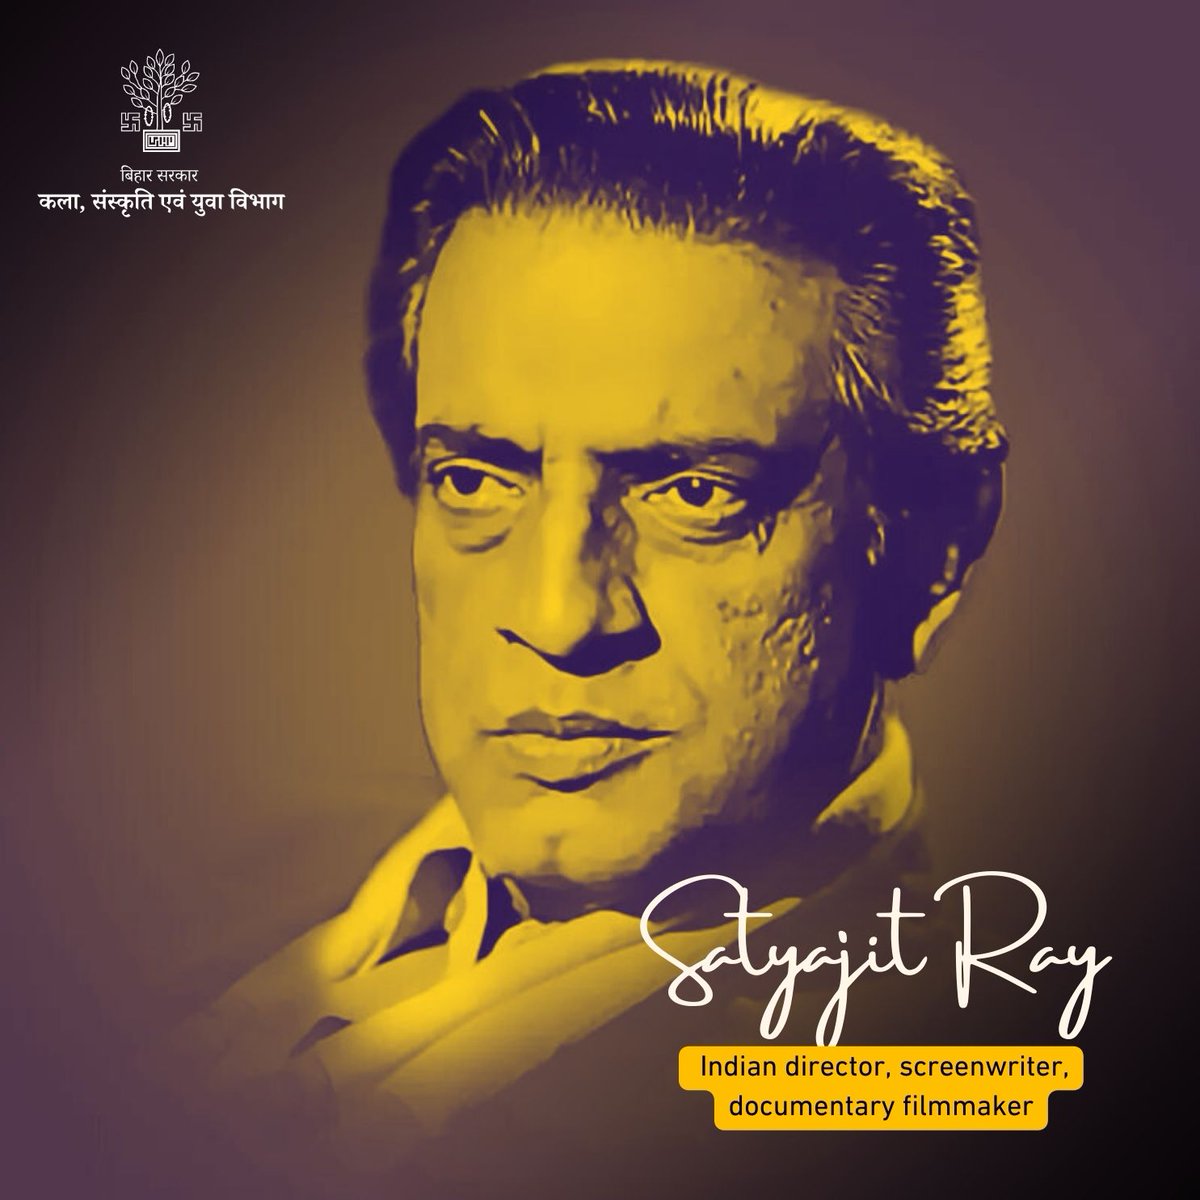 Satyajit Ray, a filmmaking giant, brought Indian cinema to the global stage. We remember him today, on his death anniversary. His exceptional work earned him France's prestigious Legion of Honor award in 1987. His films continue to inspire audiences worldwide.